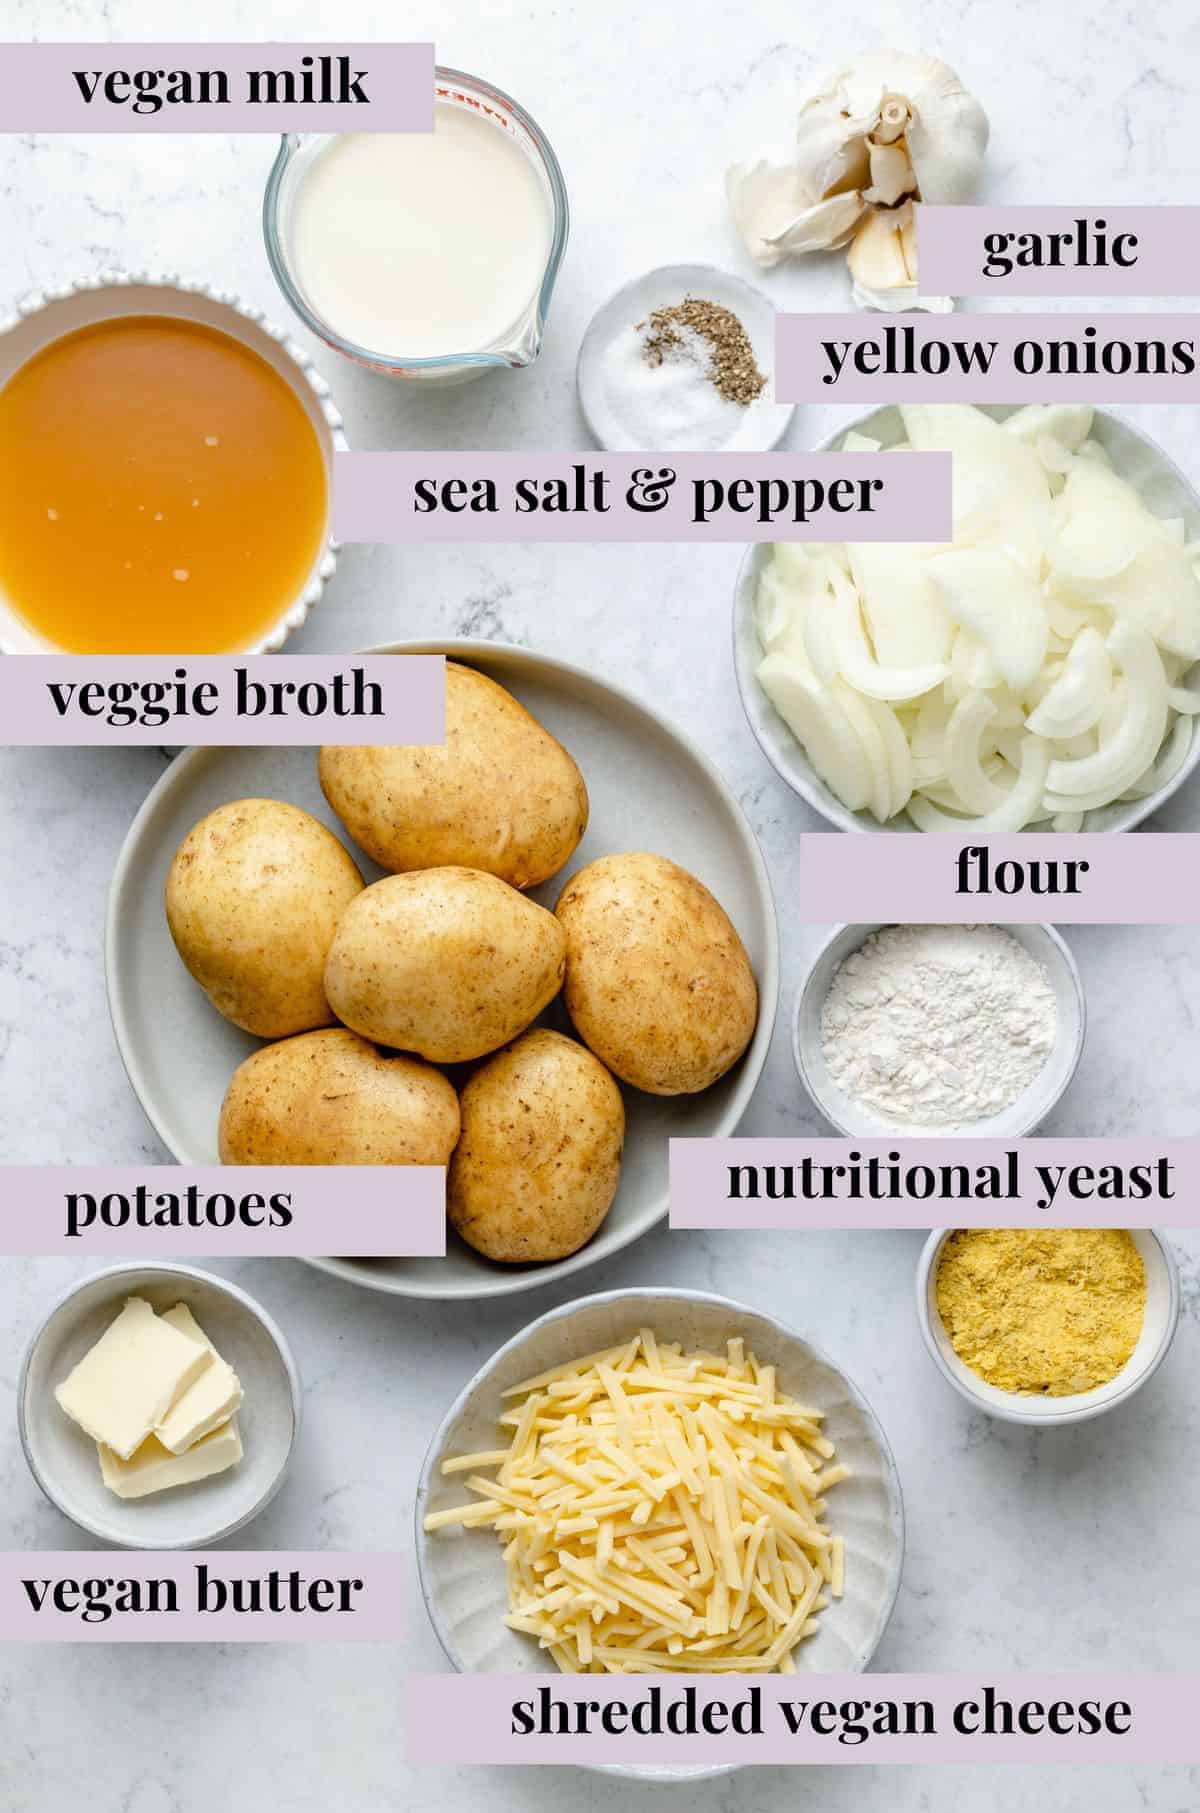 Overhead view of vegan scalloped potato ingredients with labels